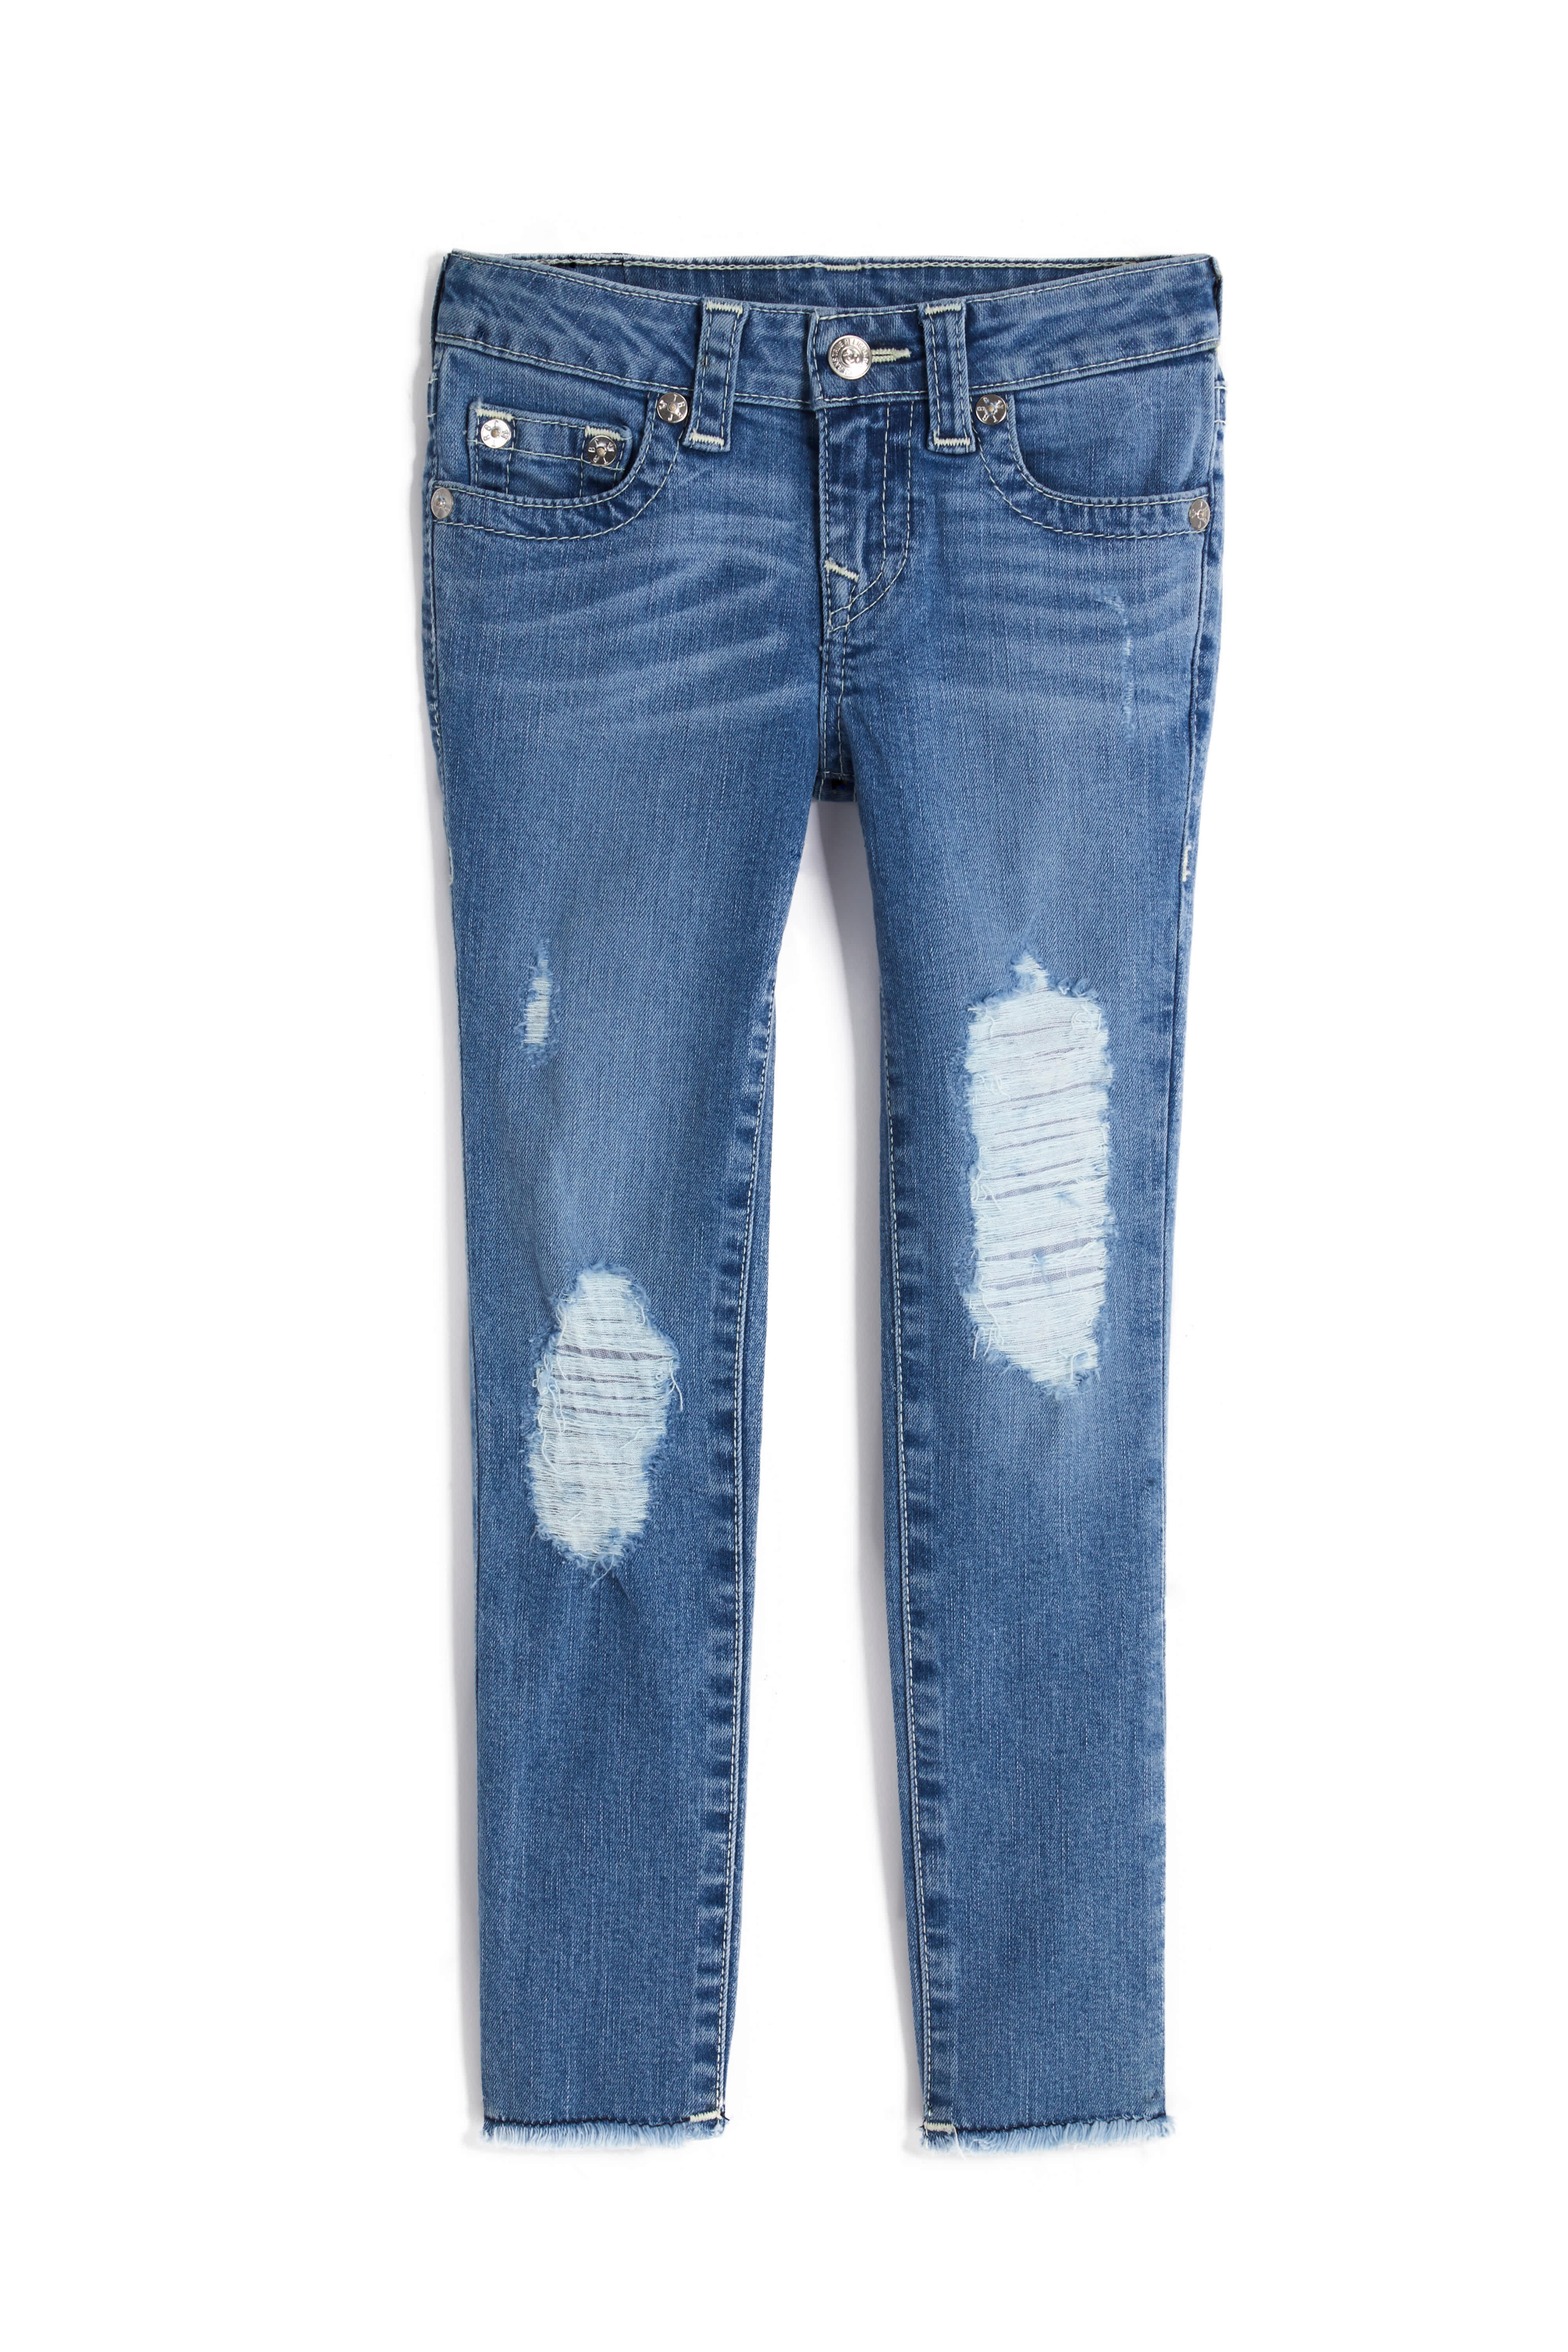 GIRLS HALLE JEANS W RIPS